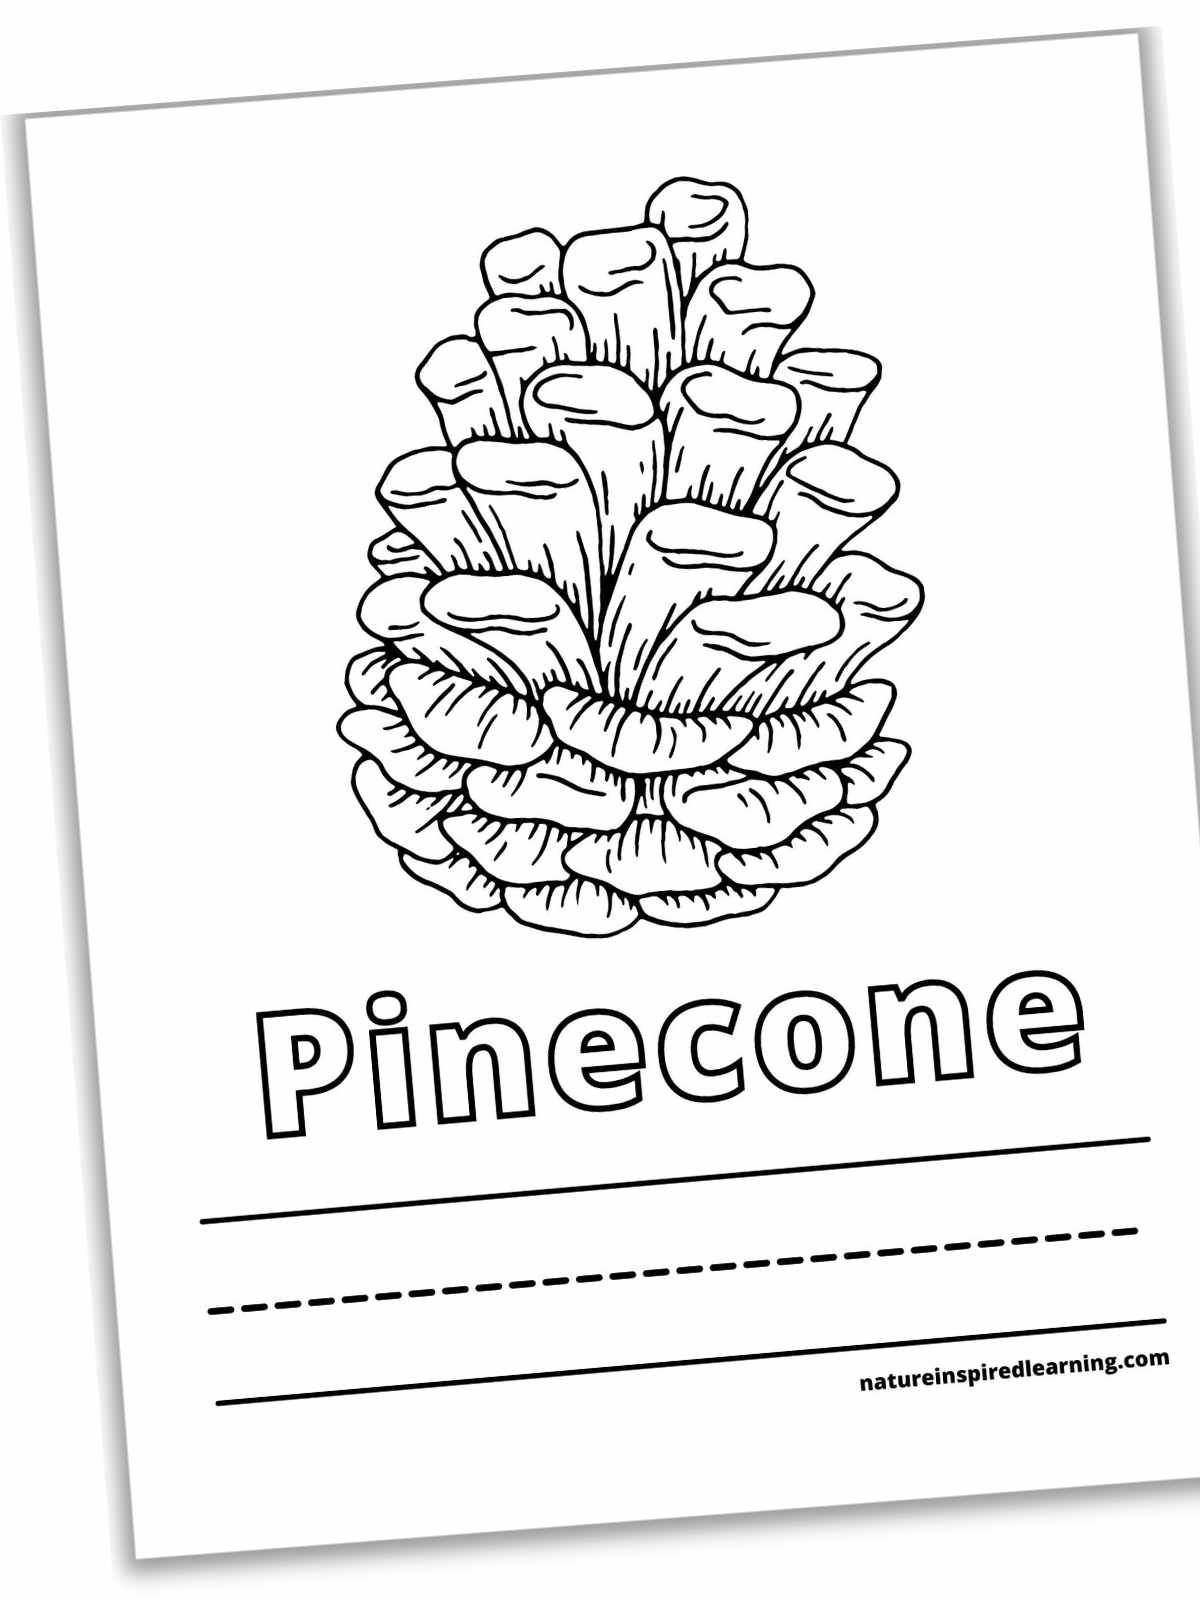 printable with a large black and white pinecone with the word written below in outline form with lines for writing